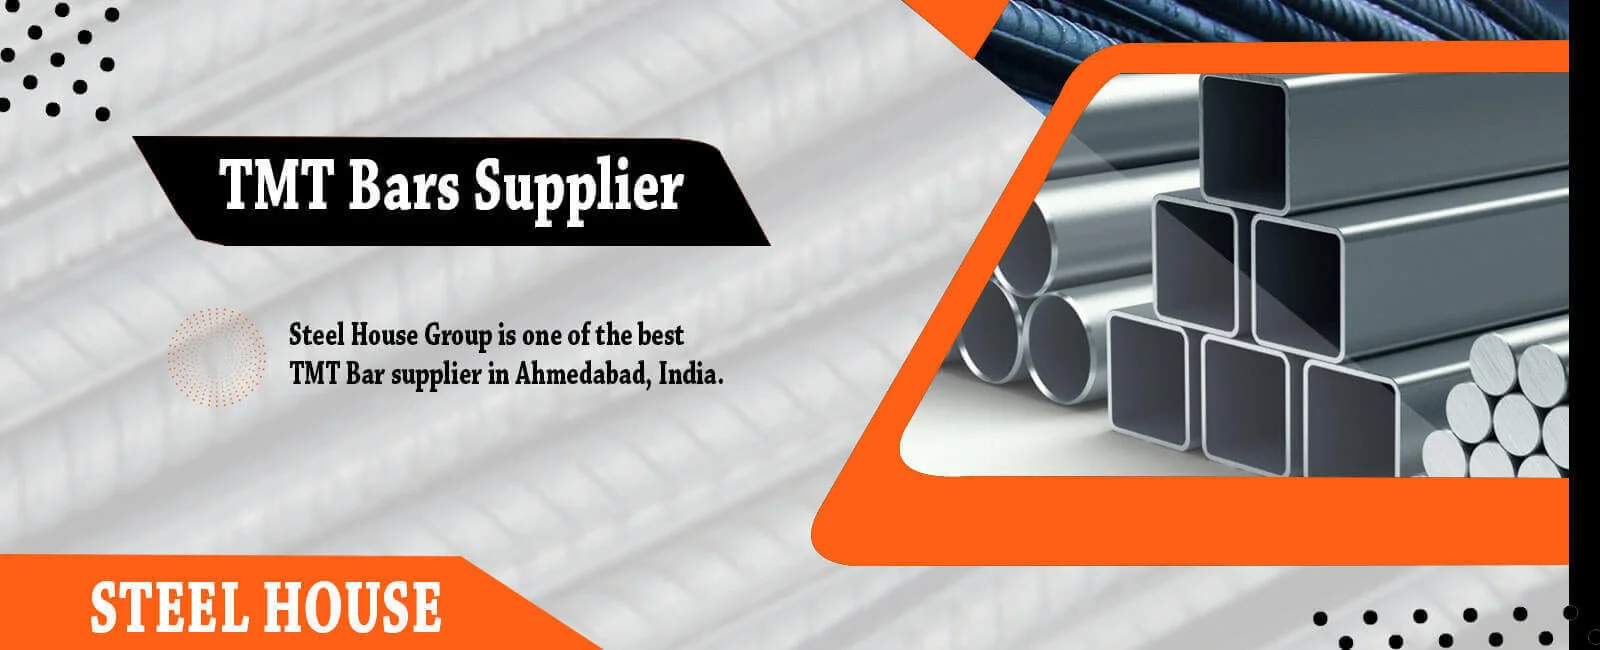 tmt bars supplier in india